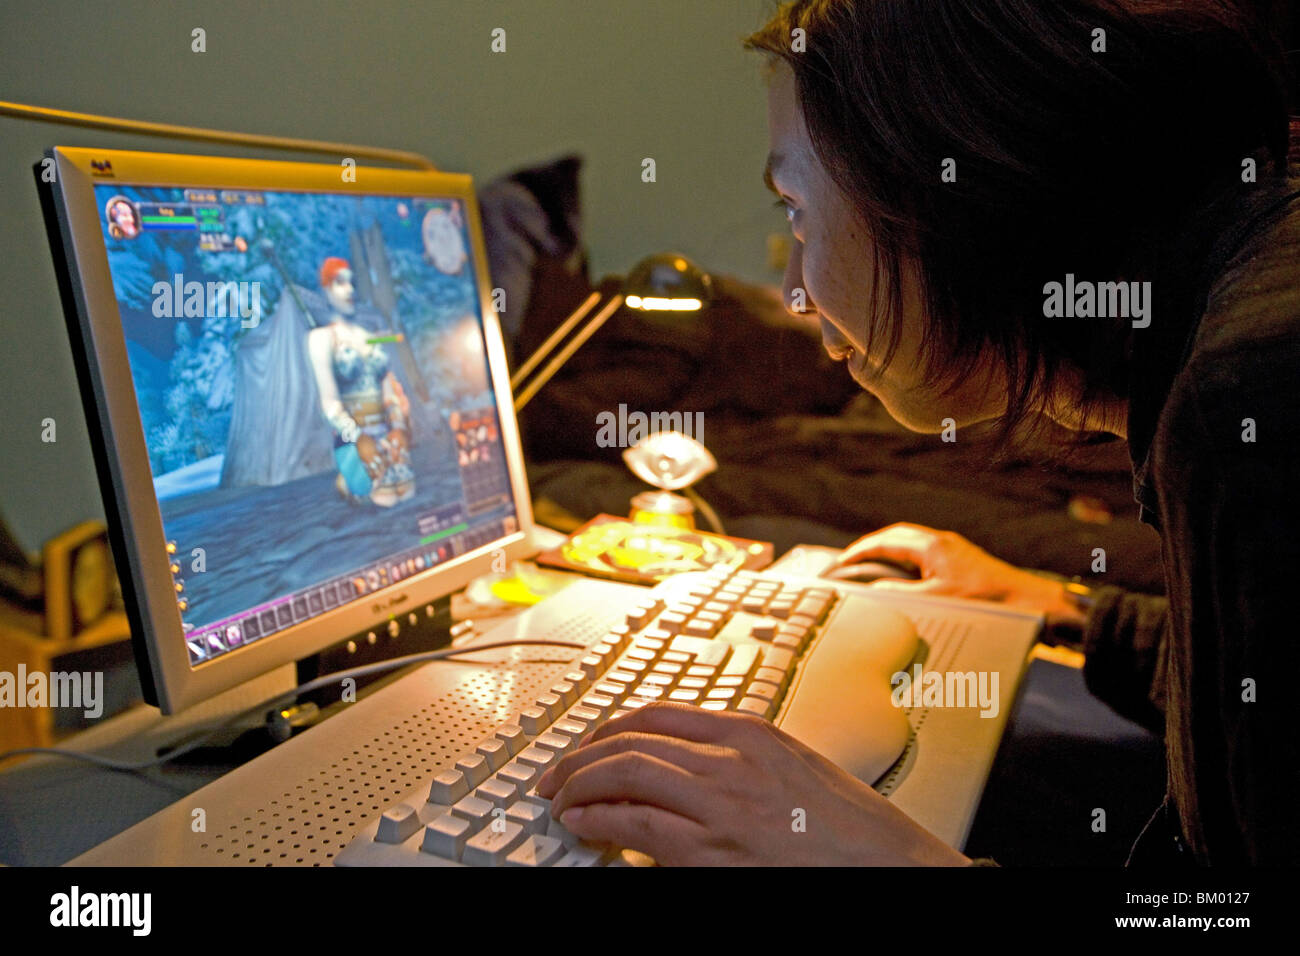 Internet-Autor Qi Ge, author, publishes in the internet, loves computer games and literature Stock Photo